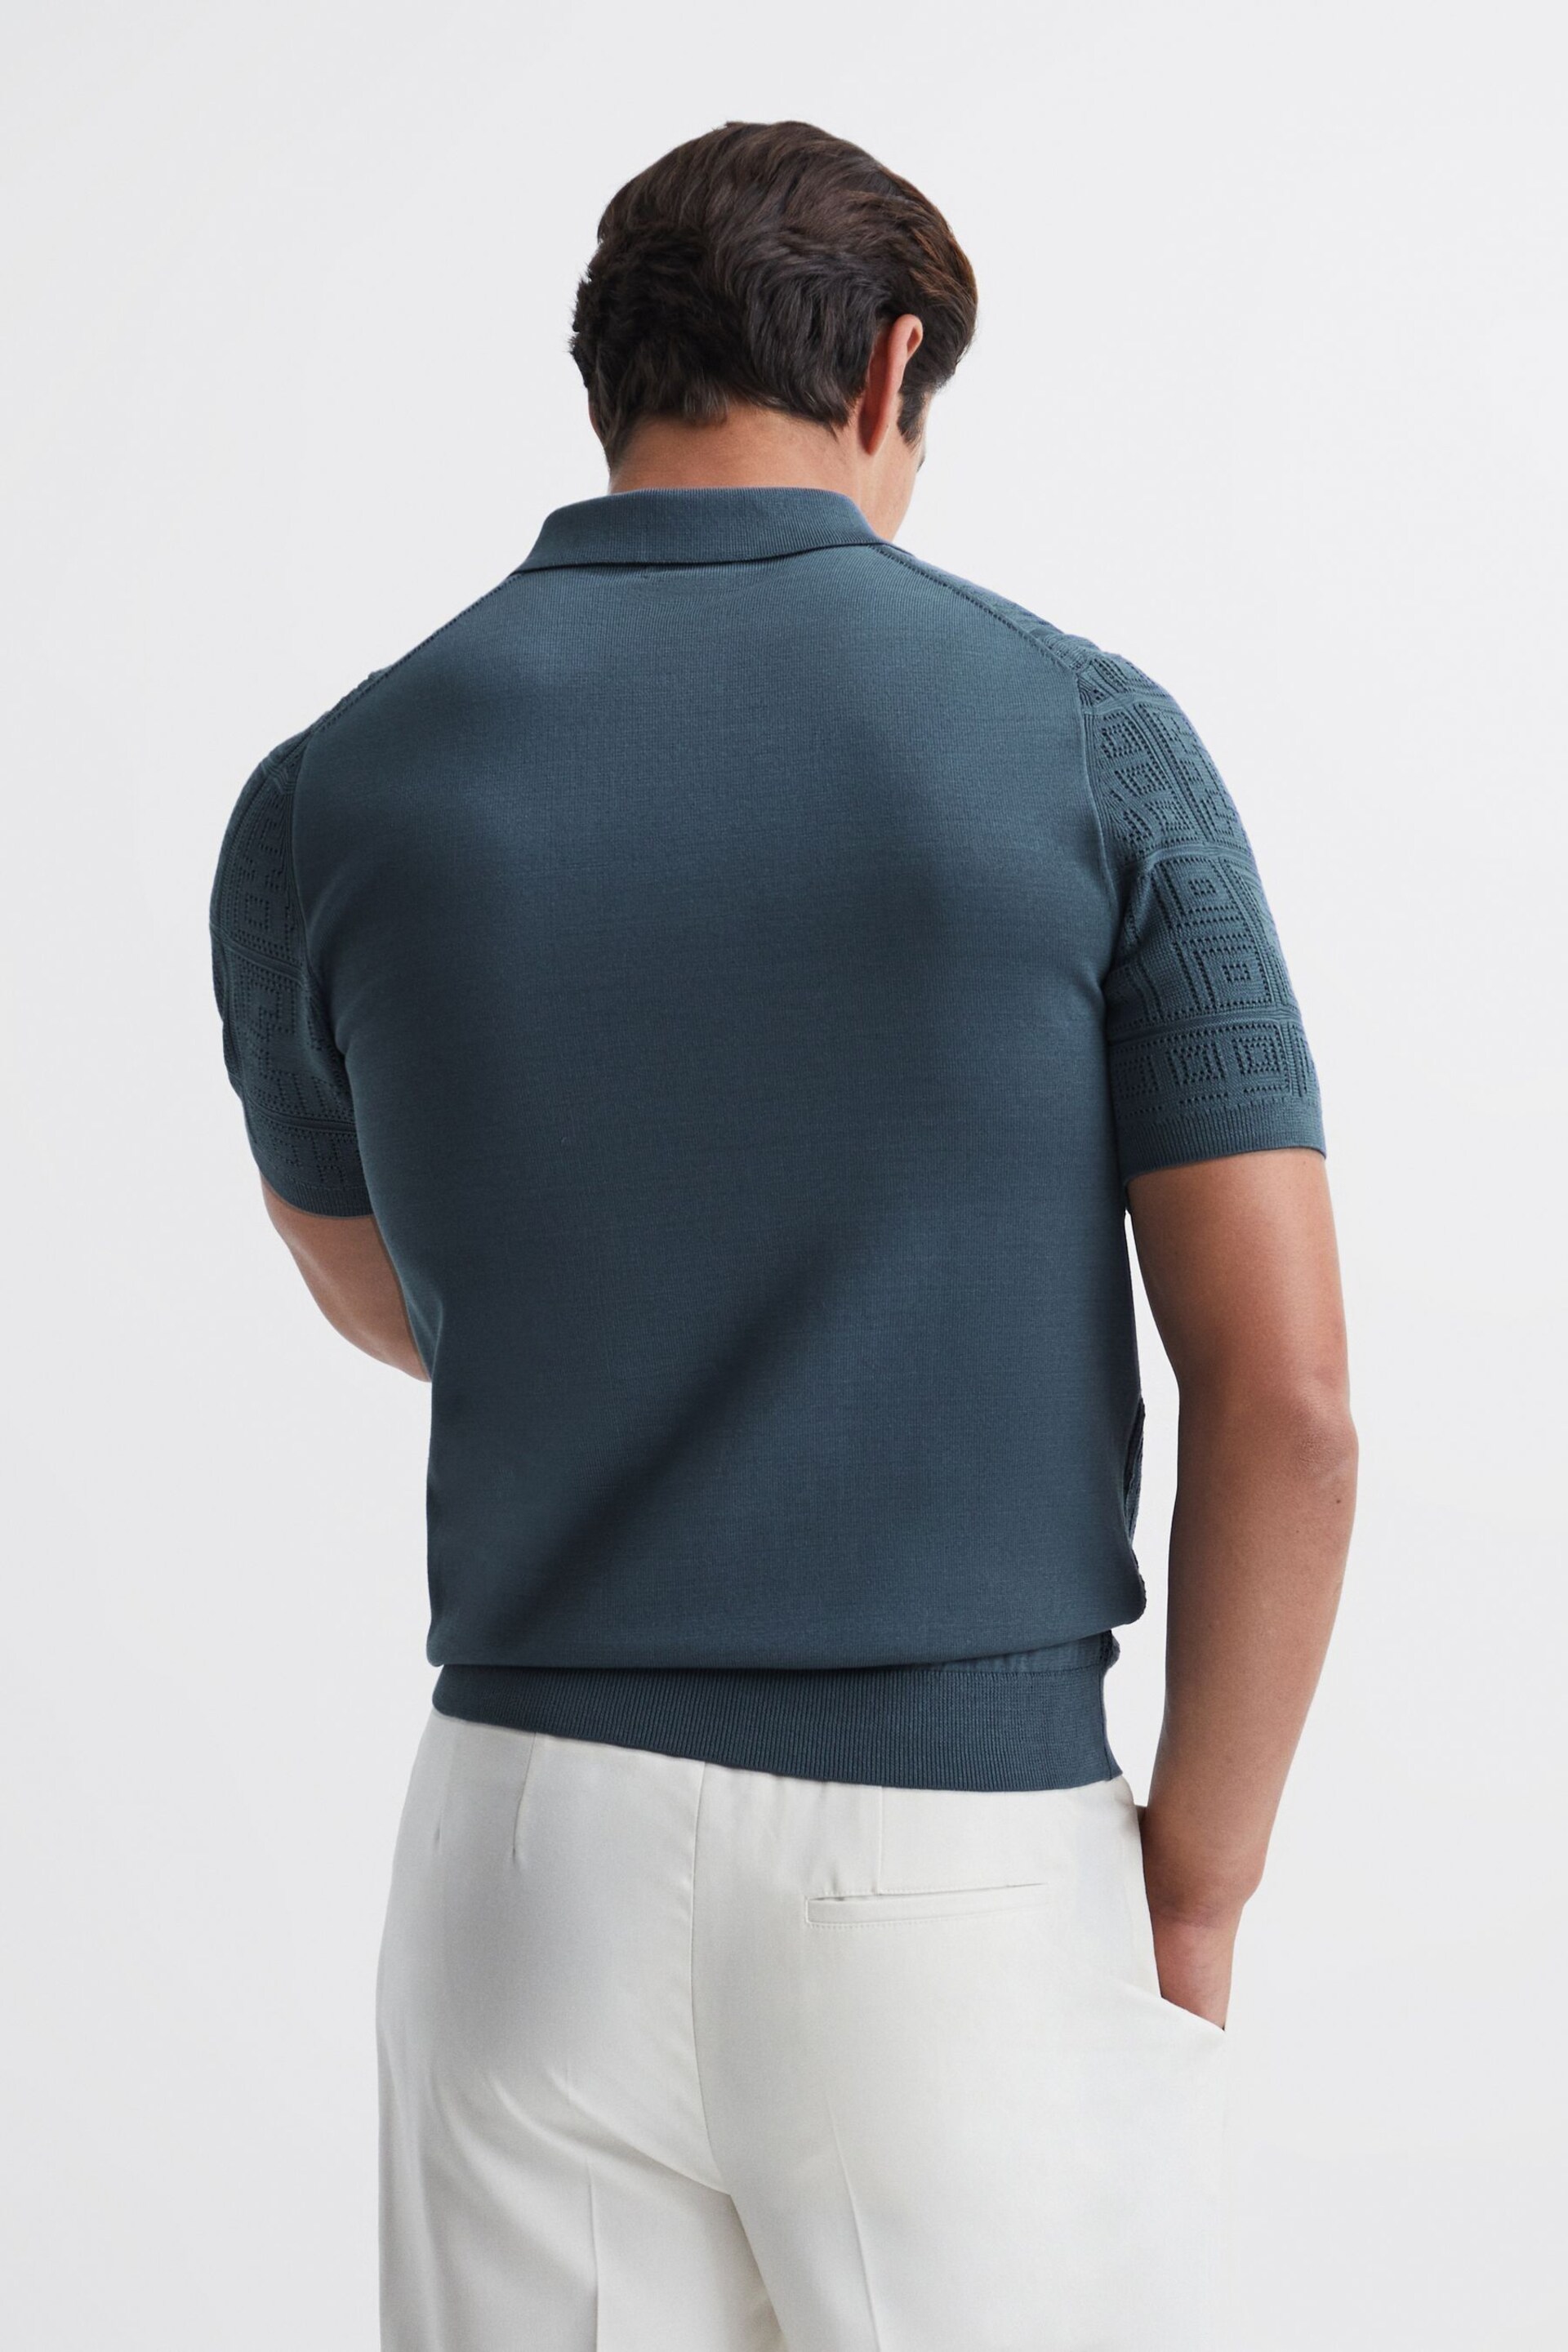 Reiss Airforce Blue Mosaic Half Zip Textured Polo Shirt - Image 5 of 6